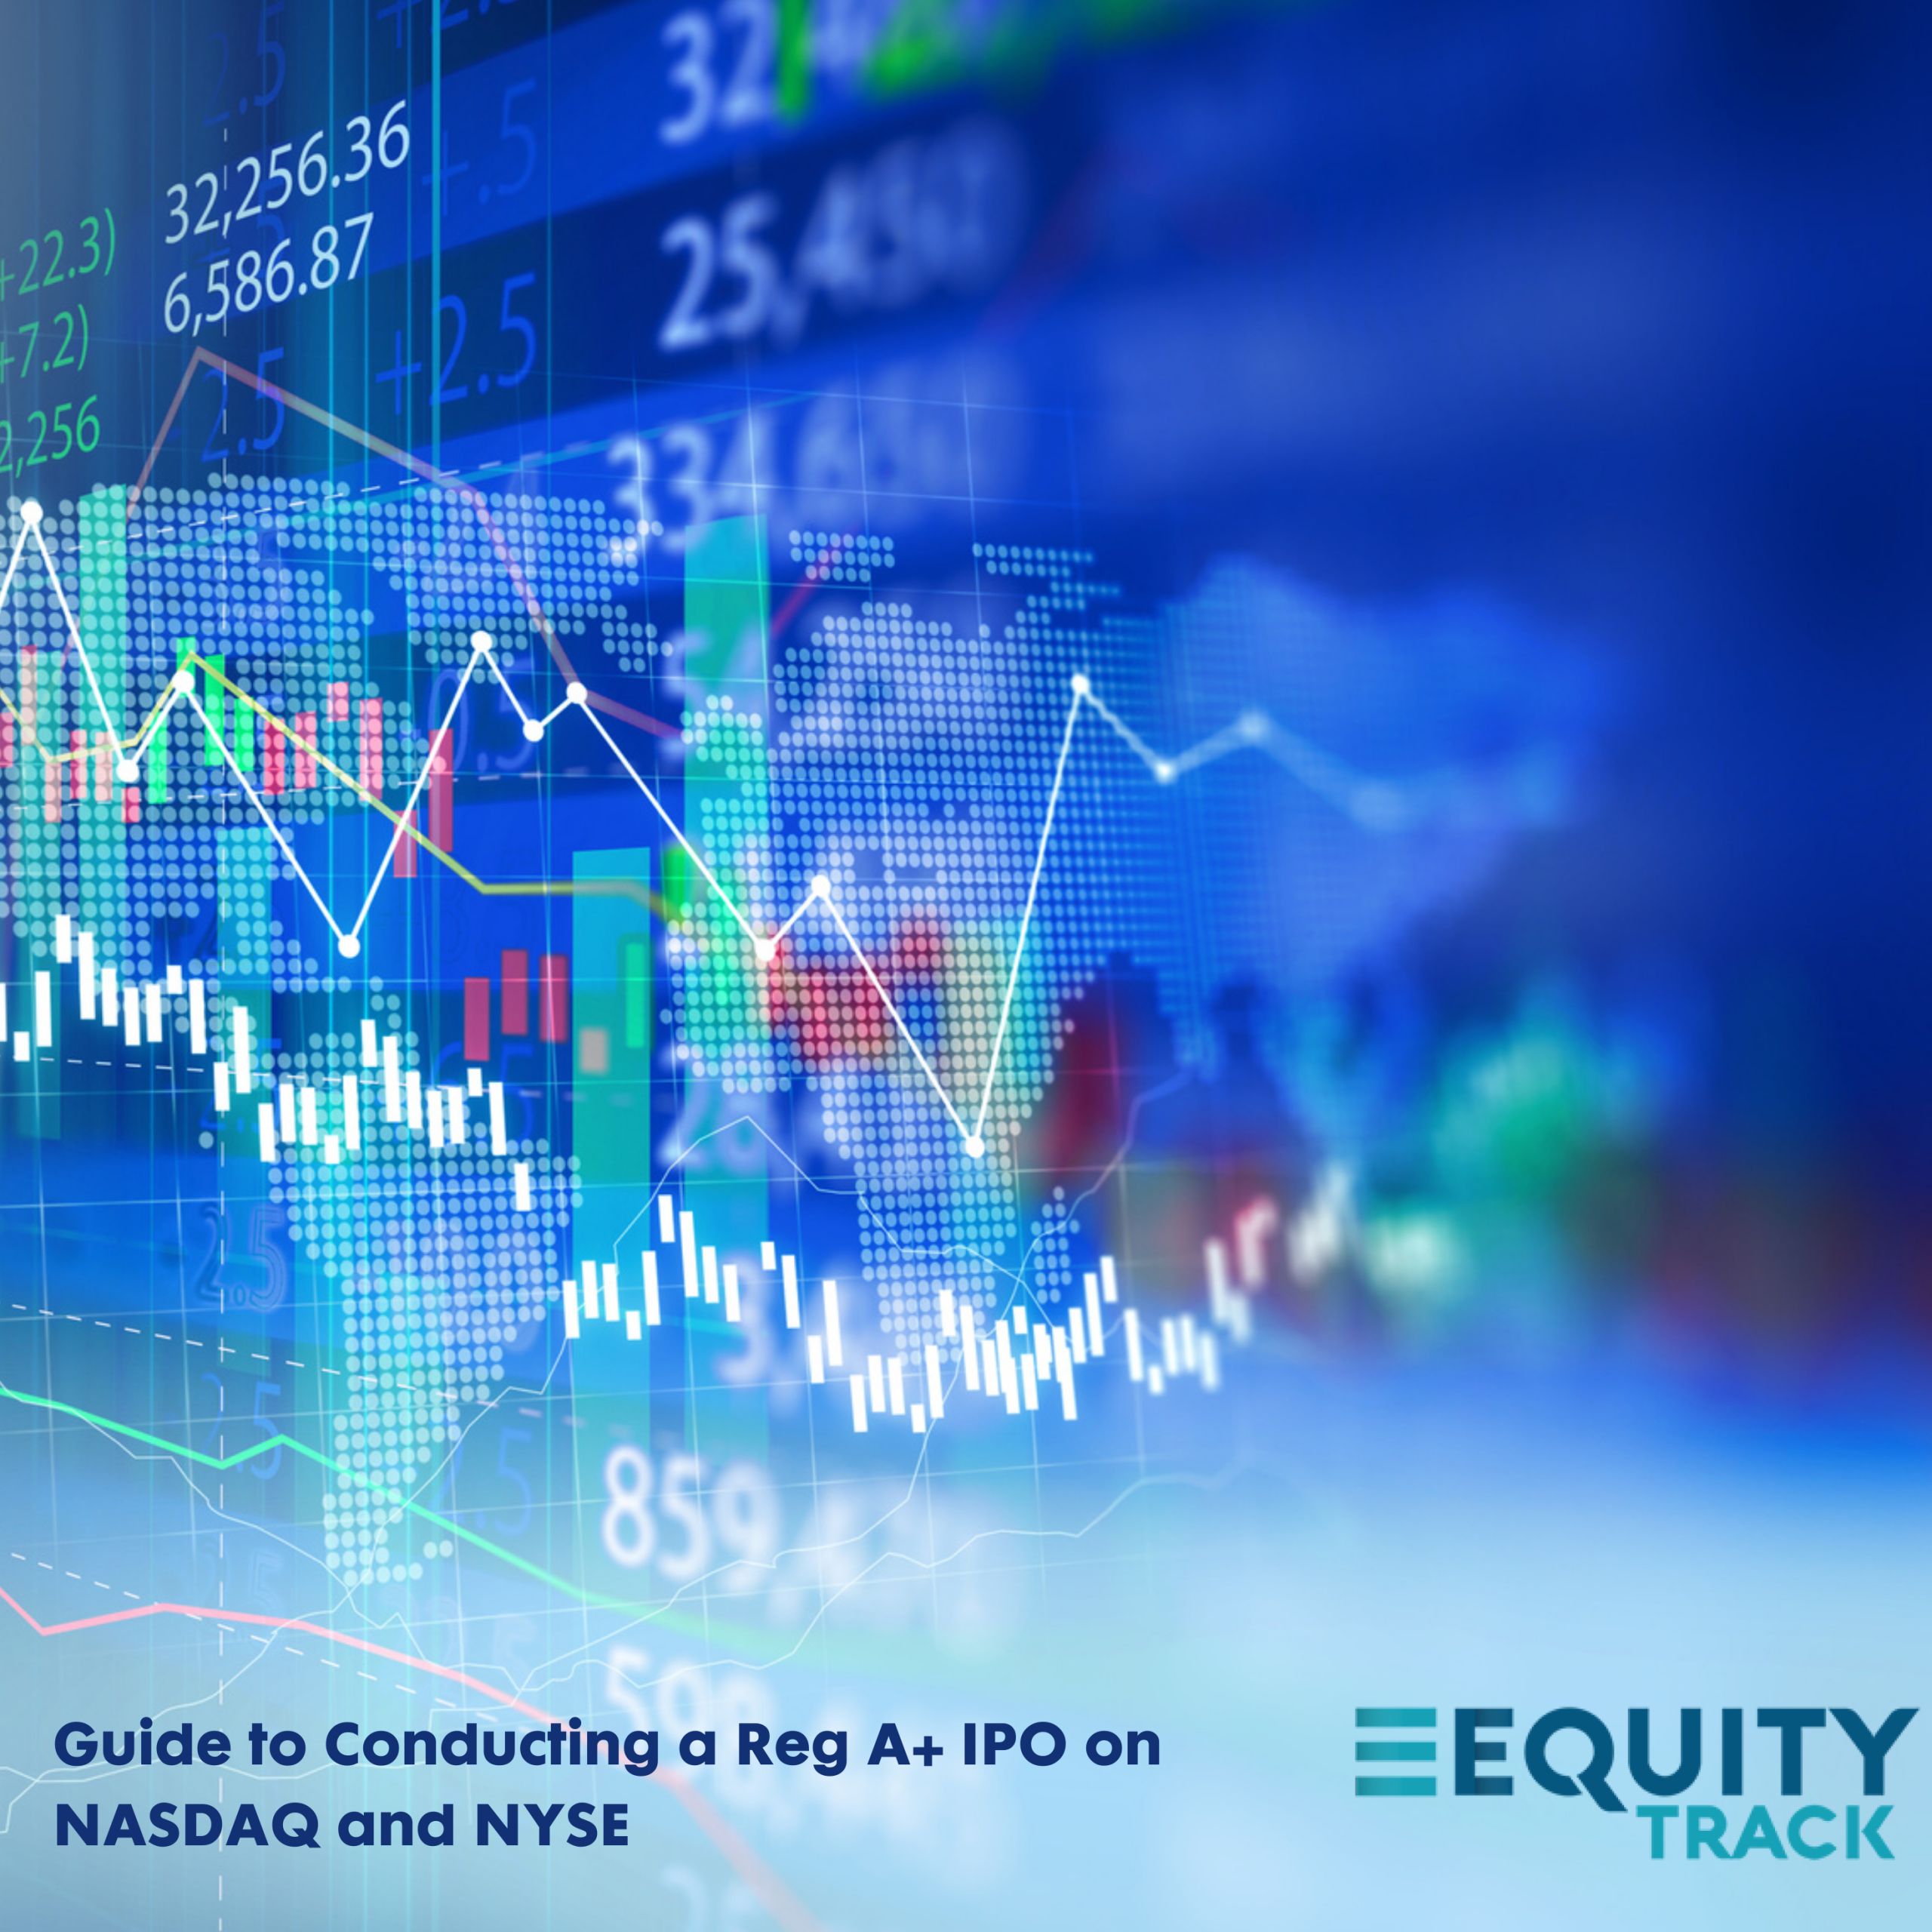 How to do a Reg A+ IPO on NASDAQ and NYSE